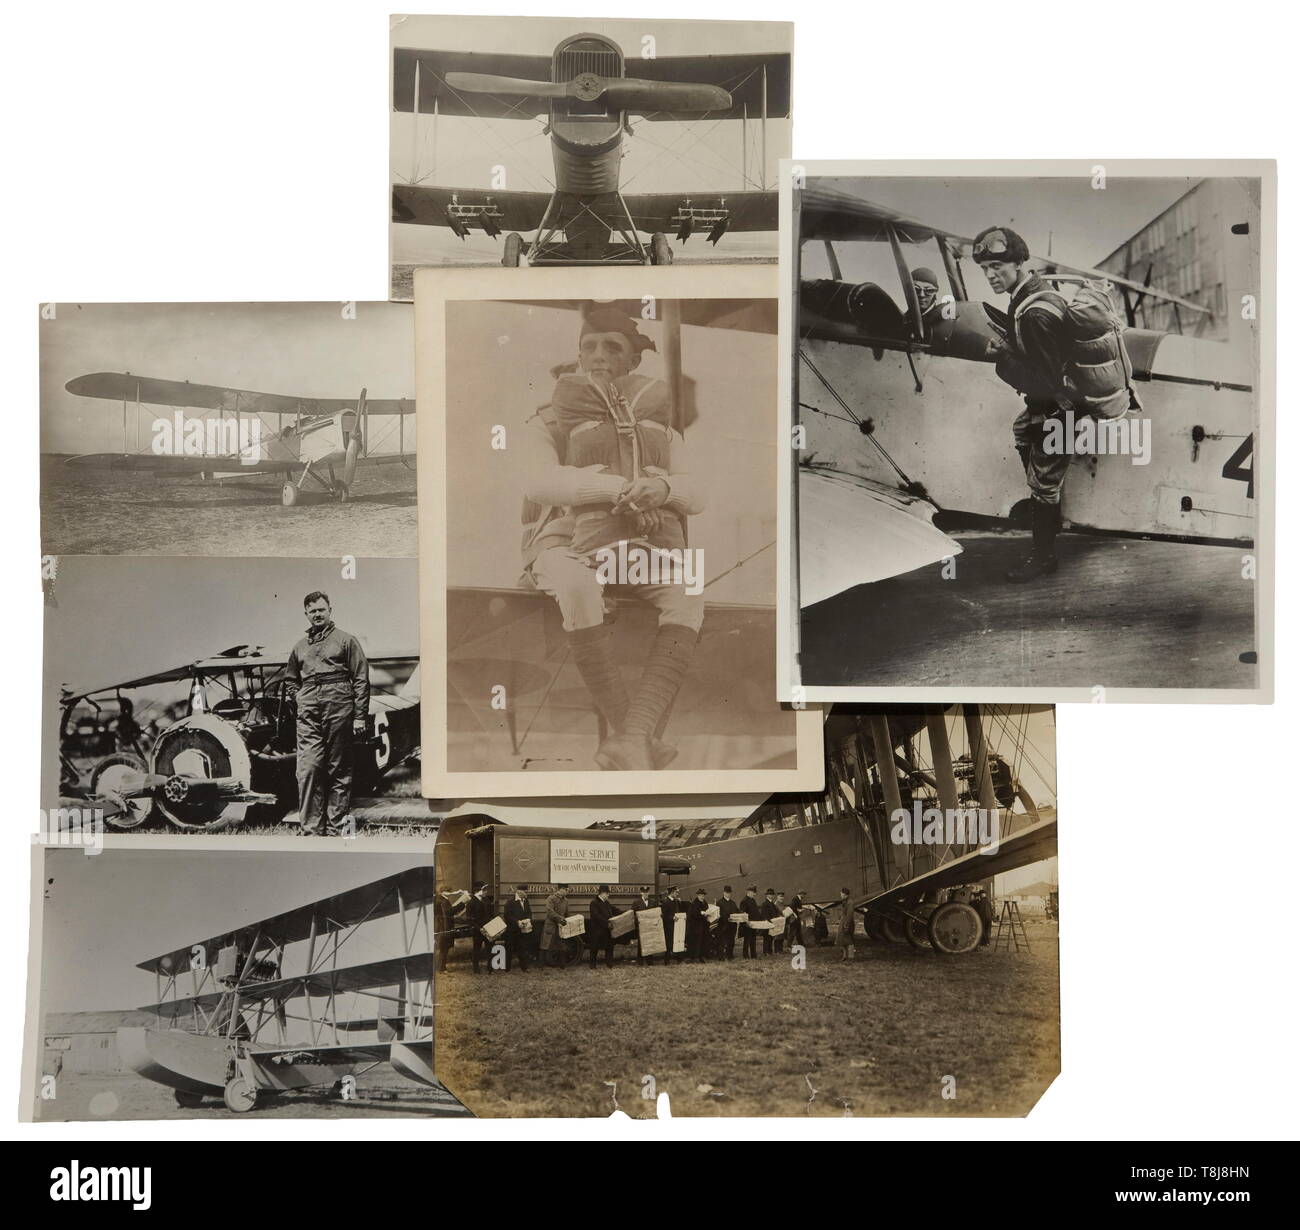 The photographic estate of the legendary American aviator George C. Pomeroy Over 30 predominantly large-size photos (13 x 18 cm) of the noted American aviator. The pictures show biplanes and monoplanes with good technical details, partially captioned at back. With English triangle calculator and a few picture postcards. Interesting estate of an American pilot who was trained by the famous pioneers Wilbur and Orville Wright. G.C. Pomeroy logged over 28,000 flight hours from these days and both world wars. historic, historical, troop, troops, armed forces, military, militaria, Editorial-Use-Only Stock Photo